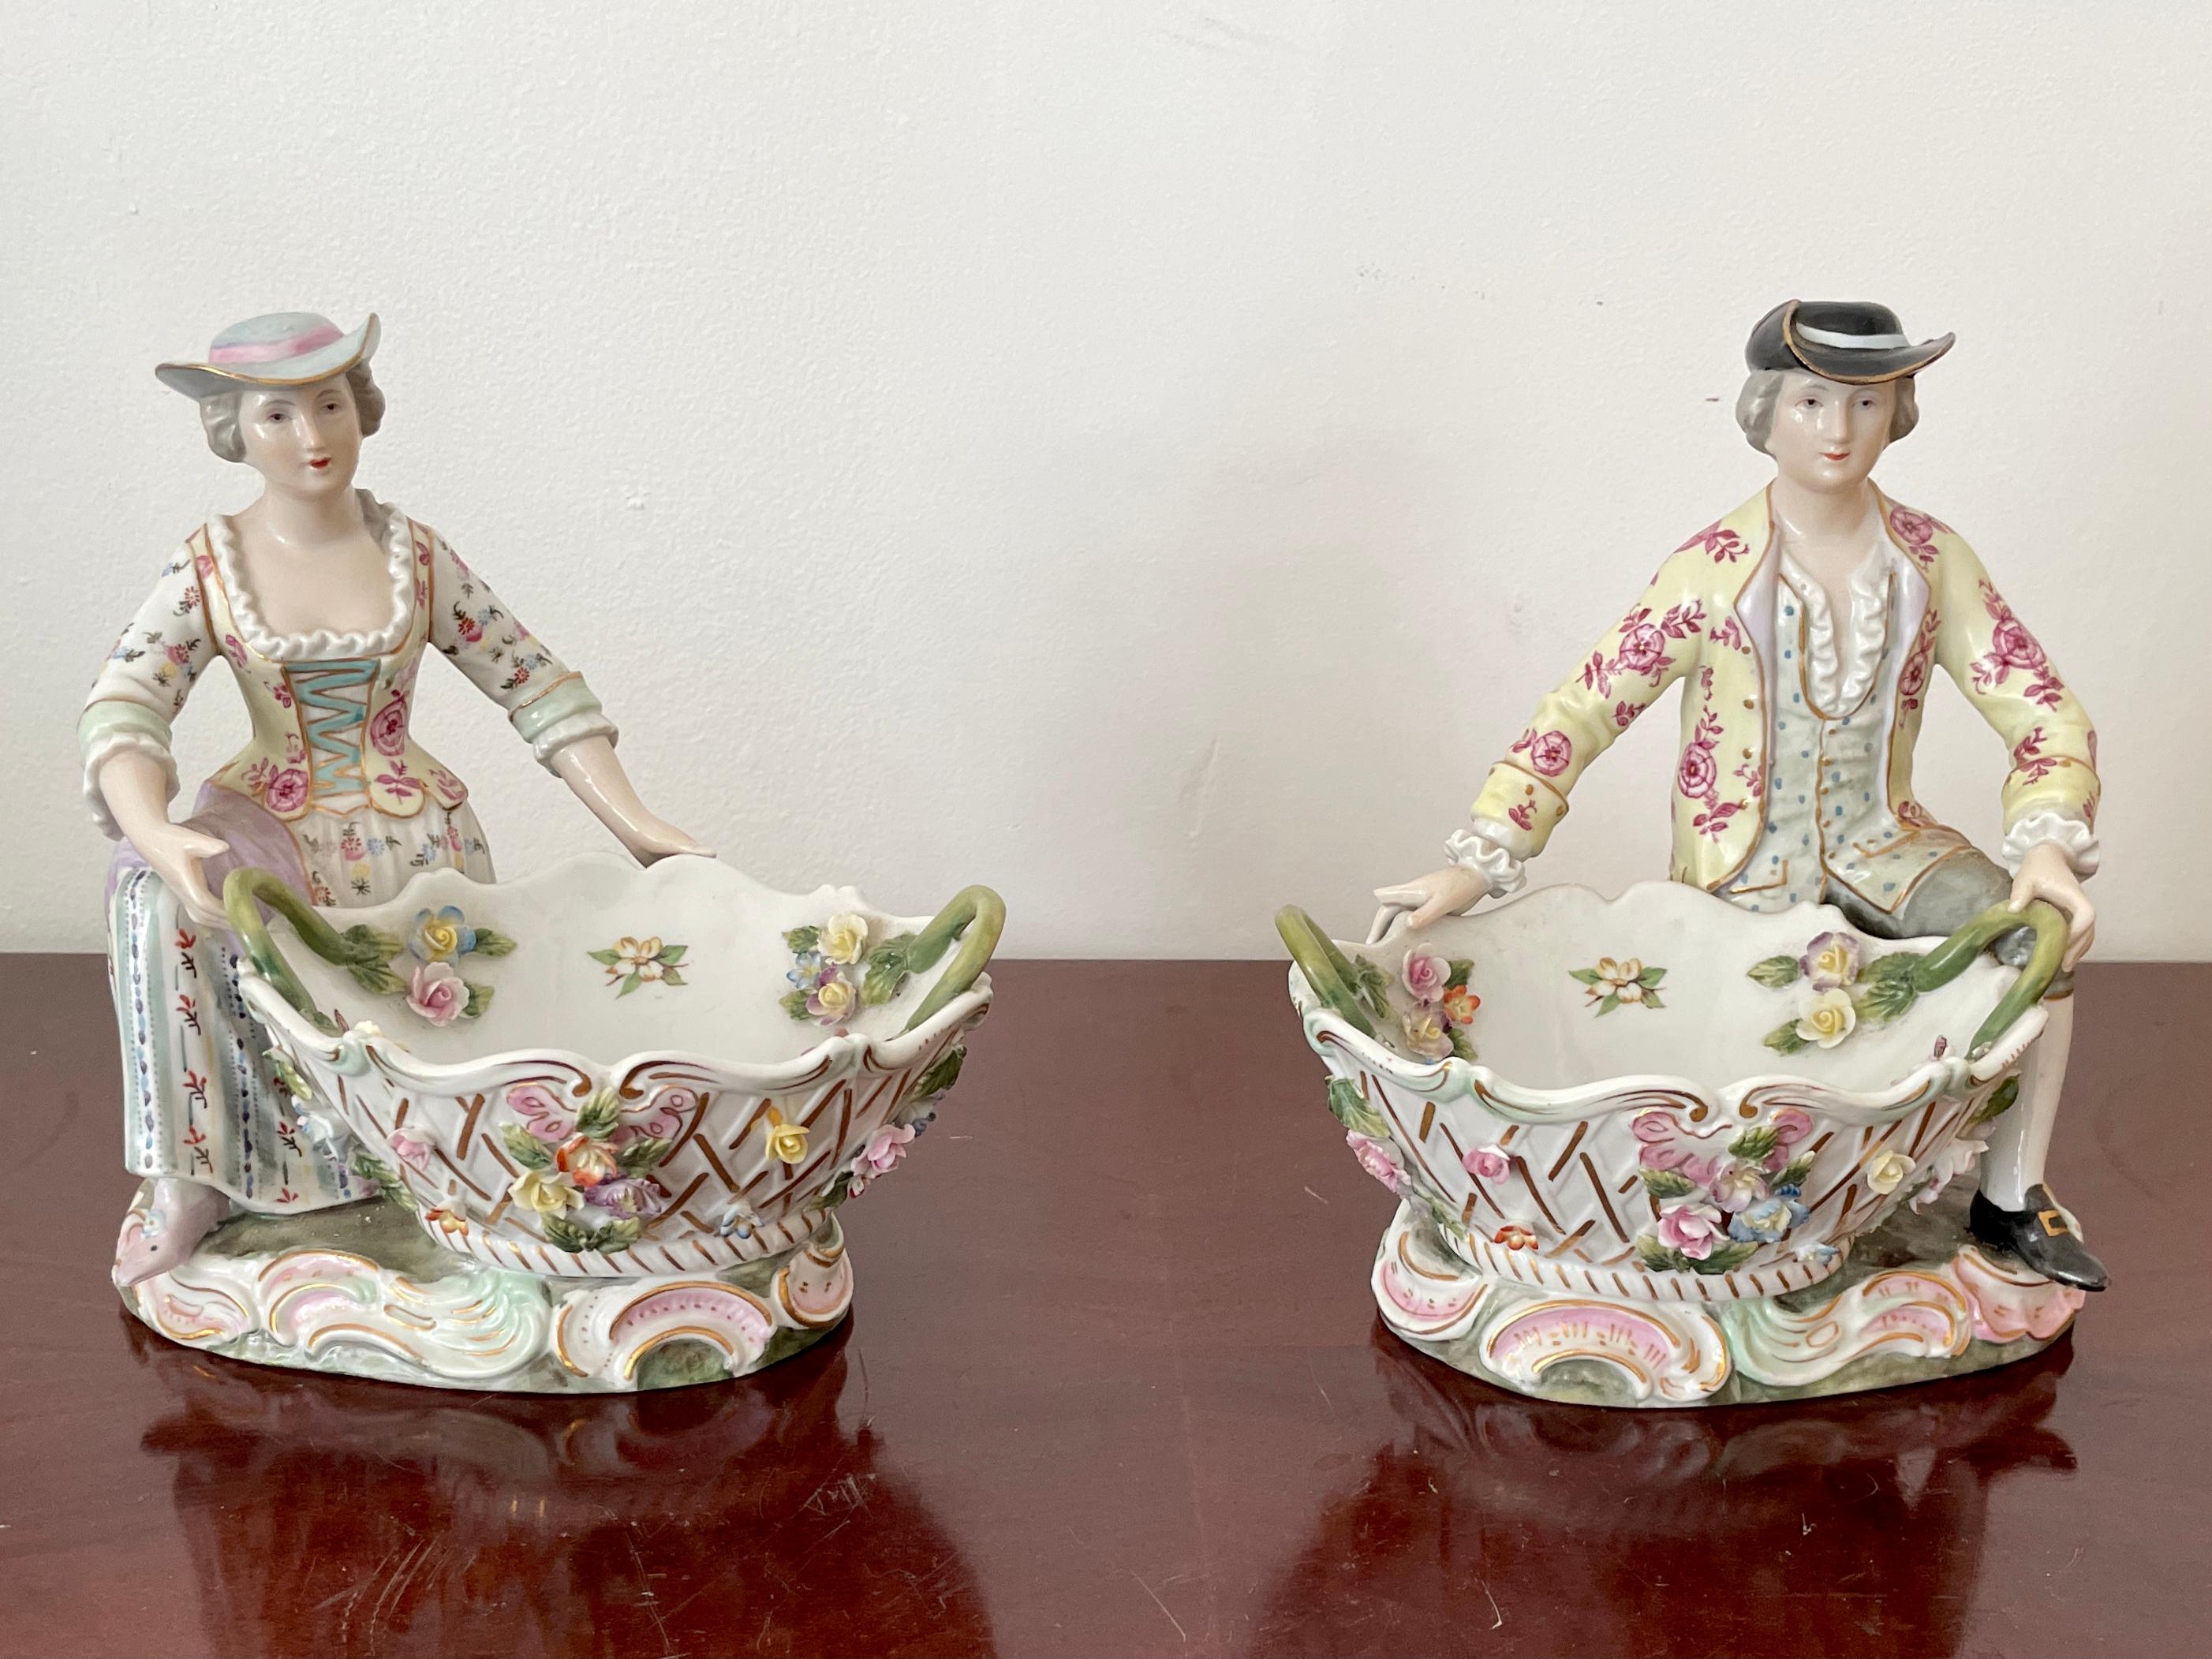 Pair of beautiful French porcelain figurines of a man and a woman holding large baskets with amazing details. These are not only for decoration but also work great as bowls. Great addition to your classic inspired table tops and interiors.